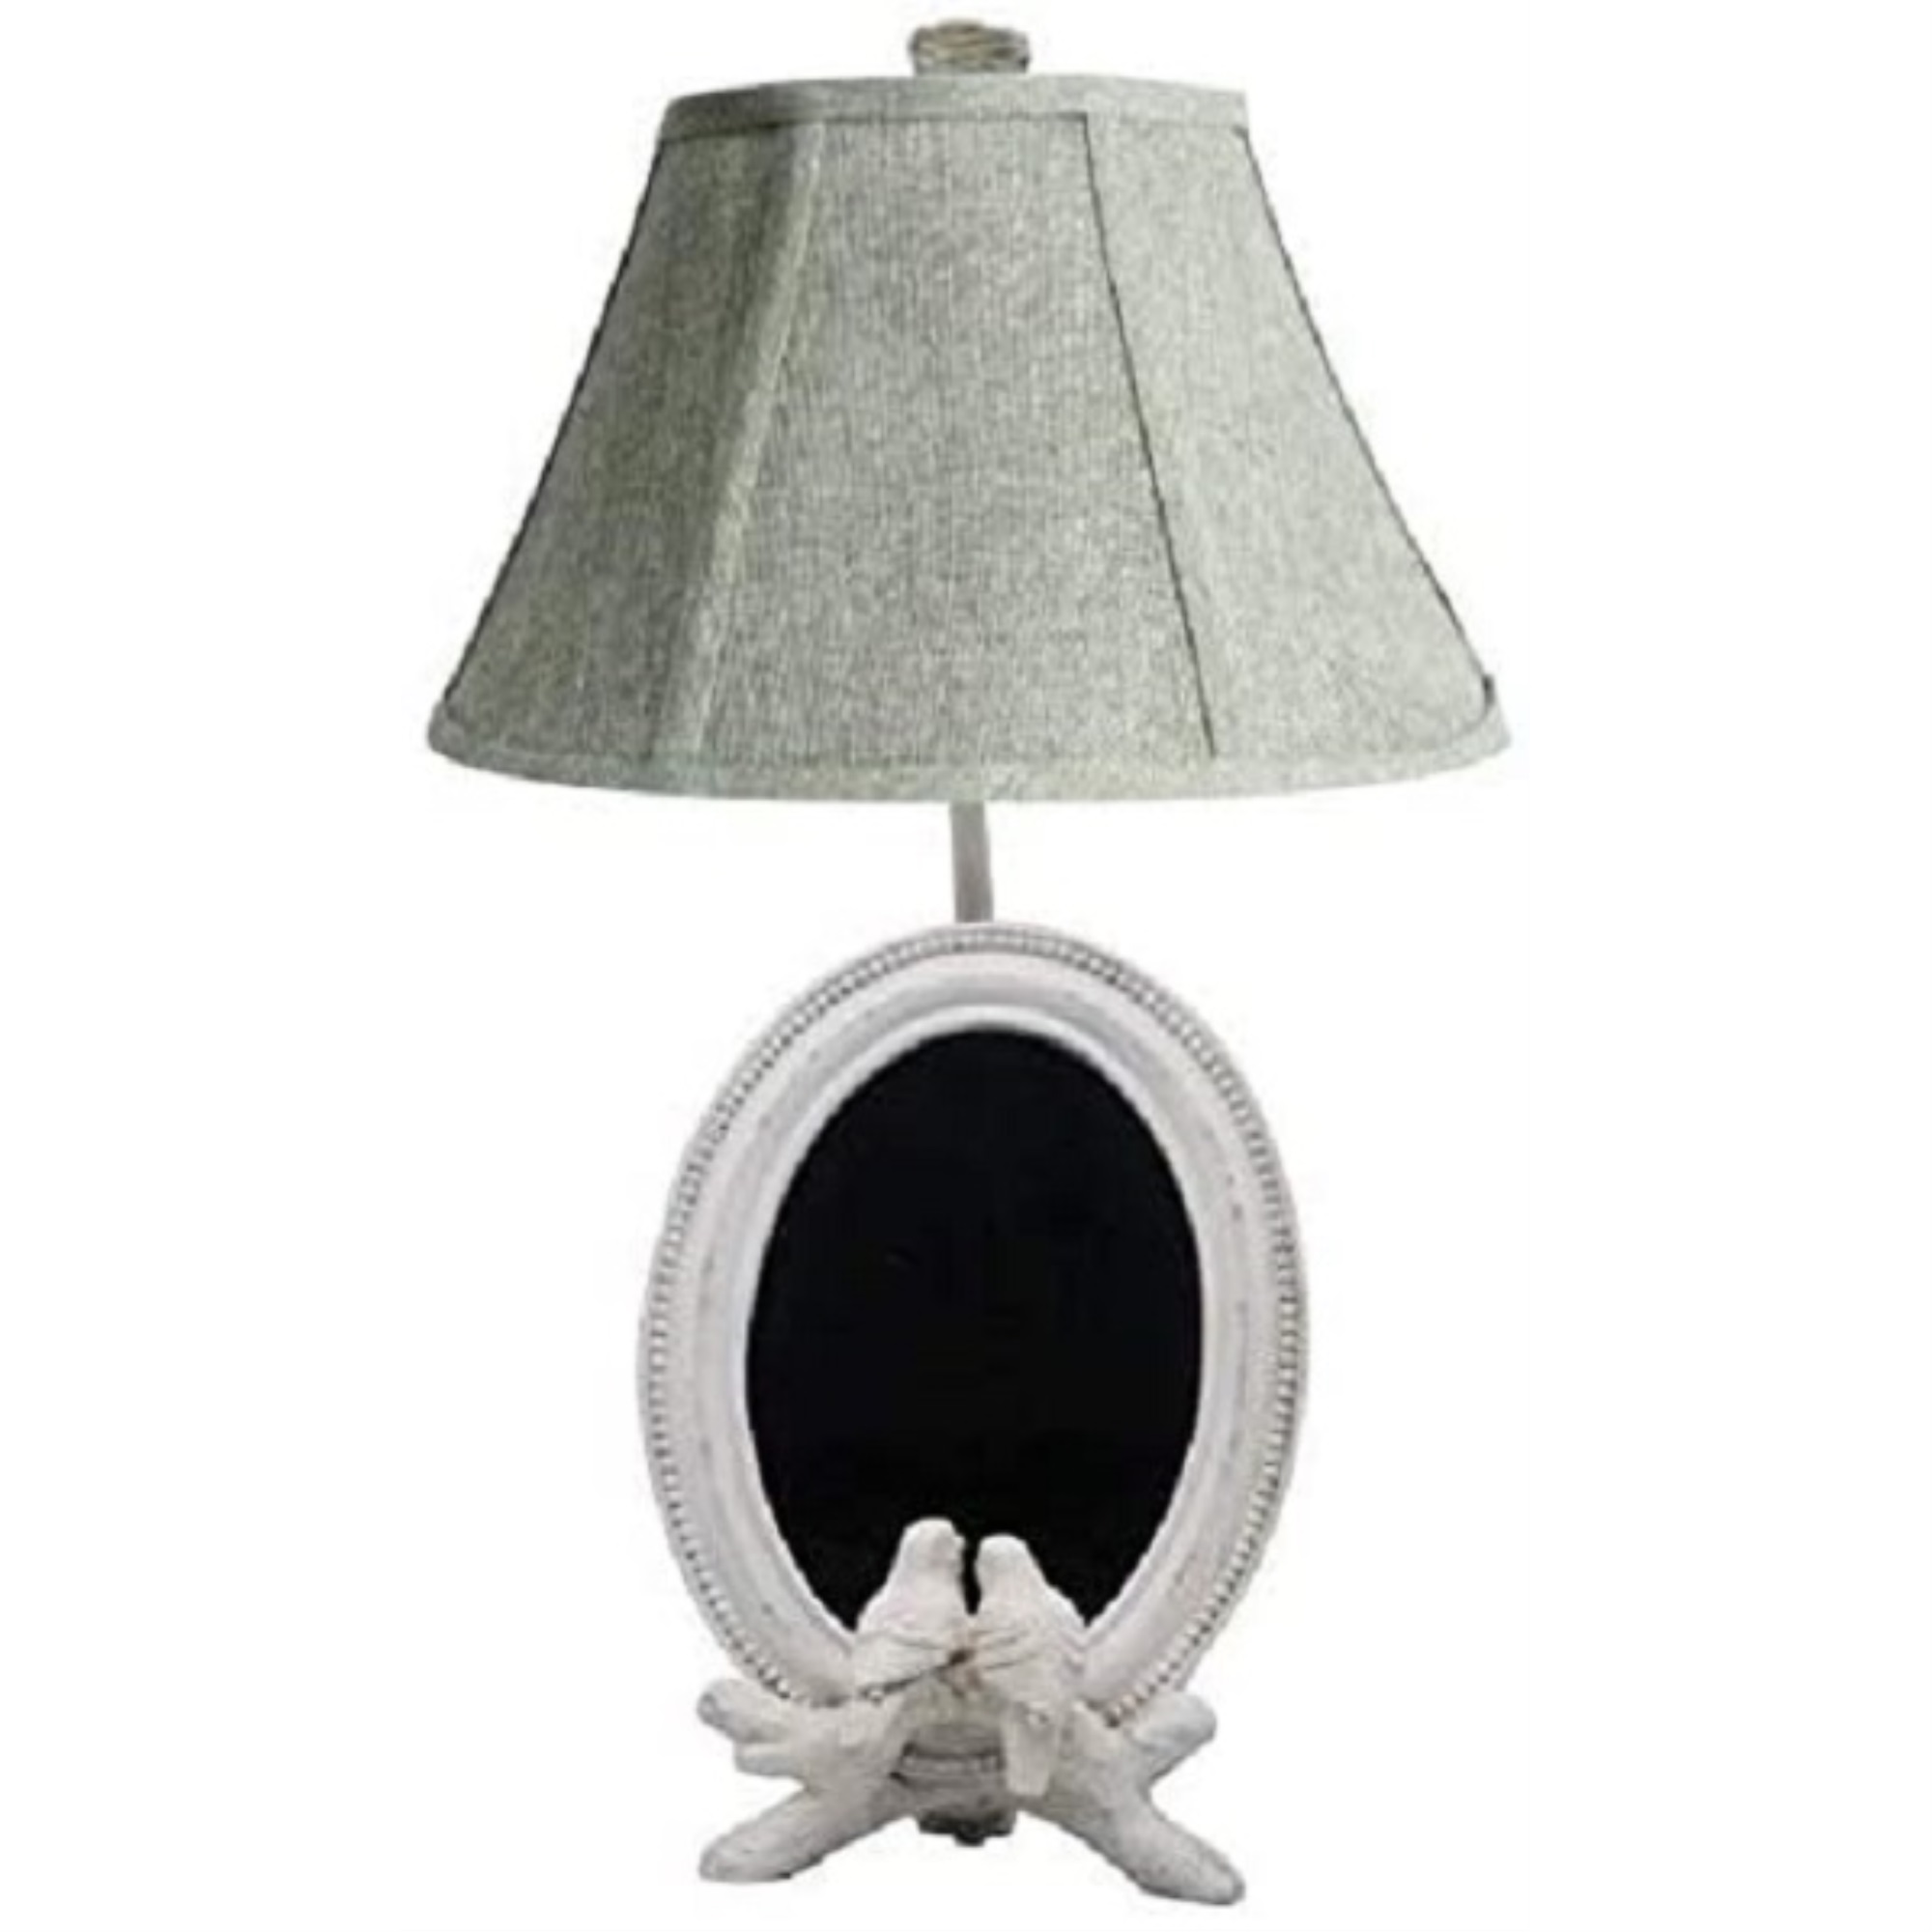 White Circular Birds Reflection Table Lamp with Gray Fabric Shade